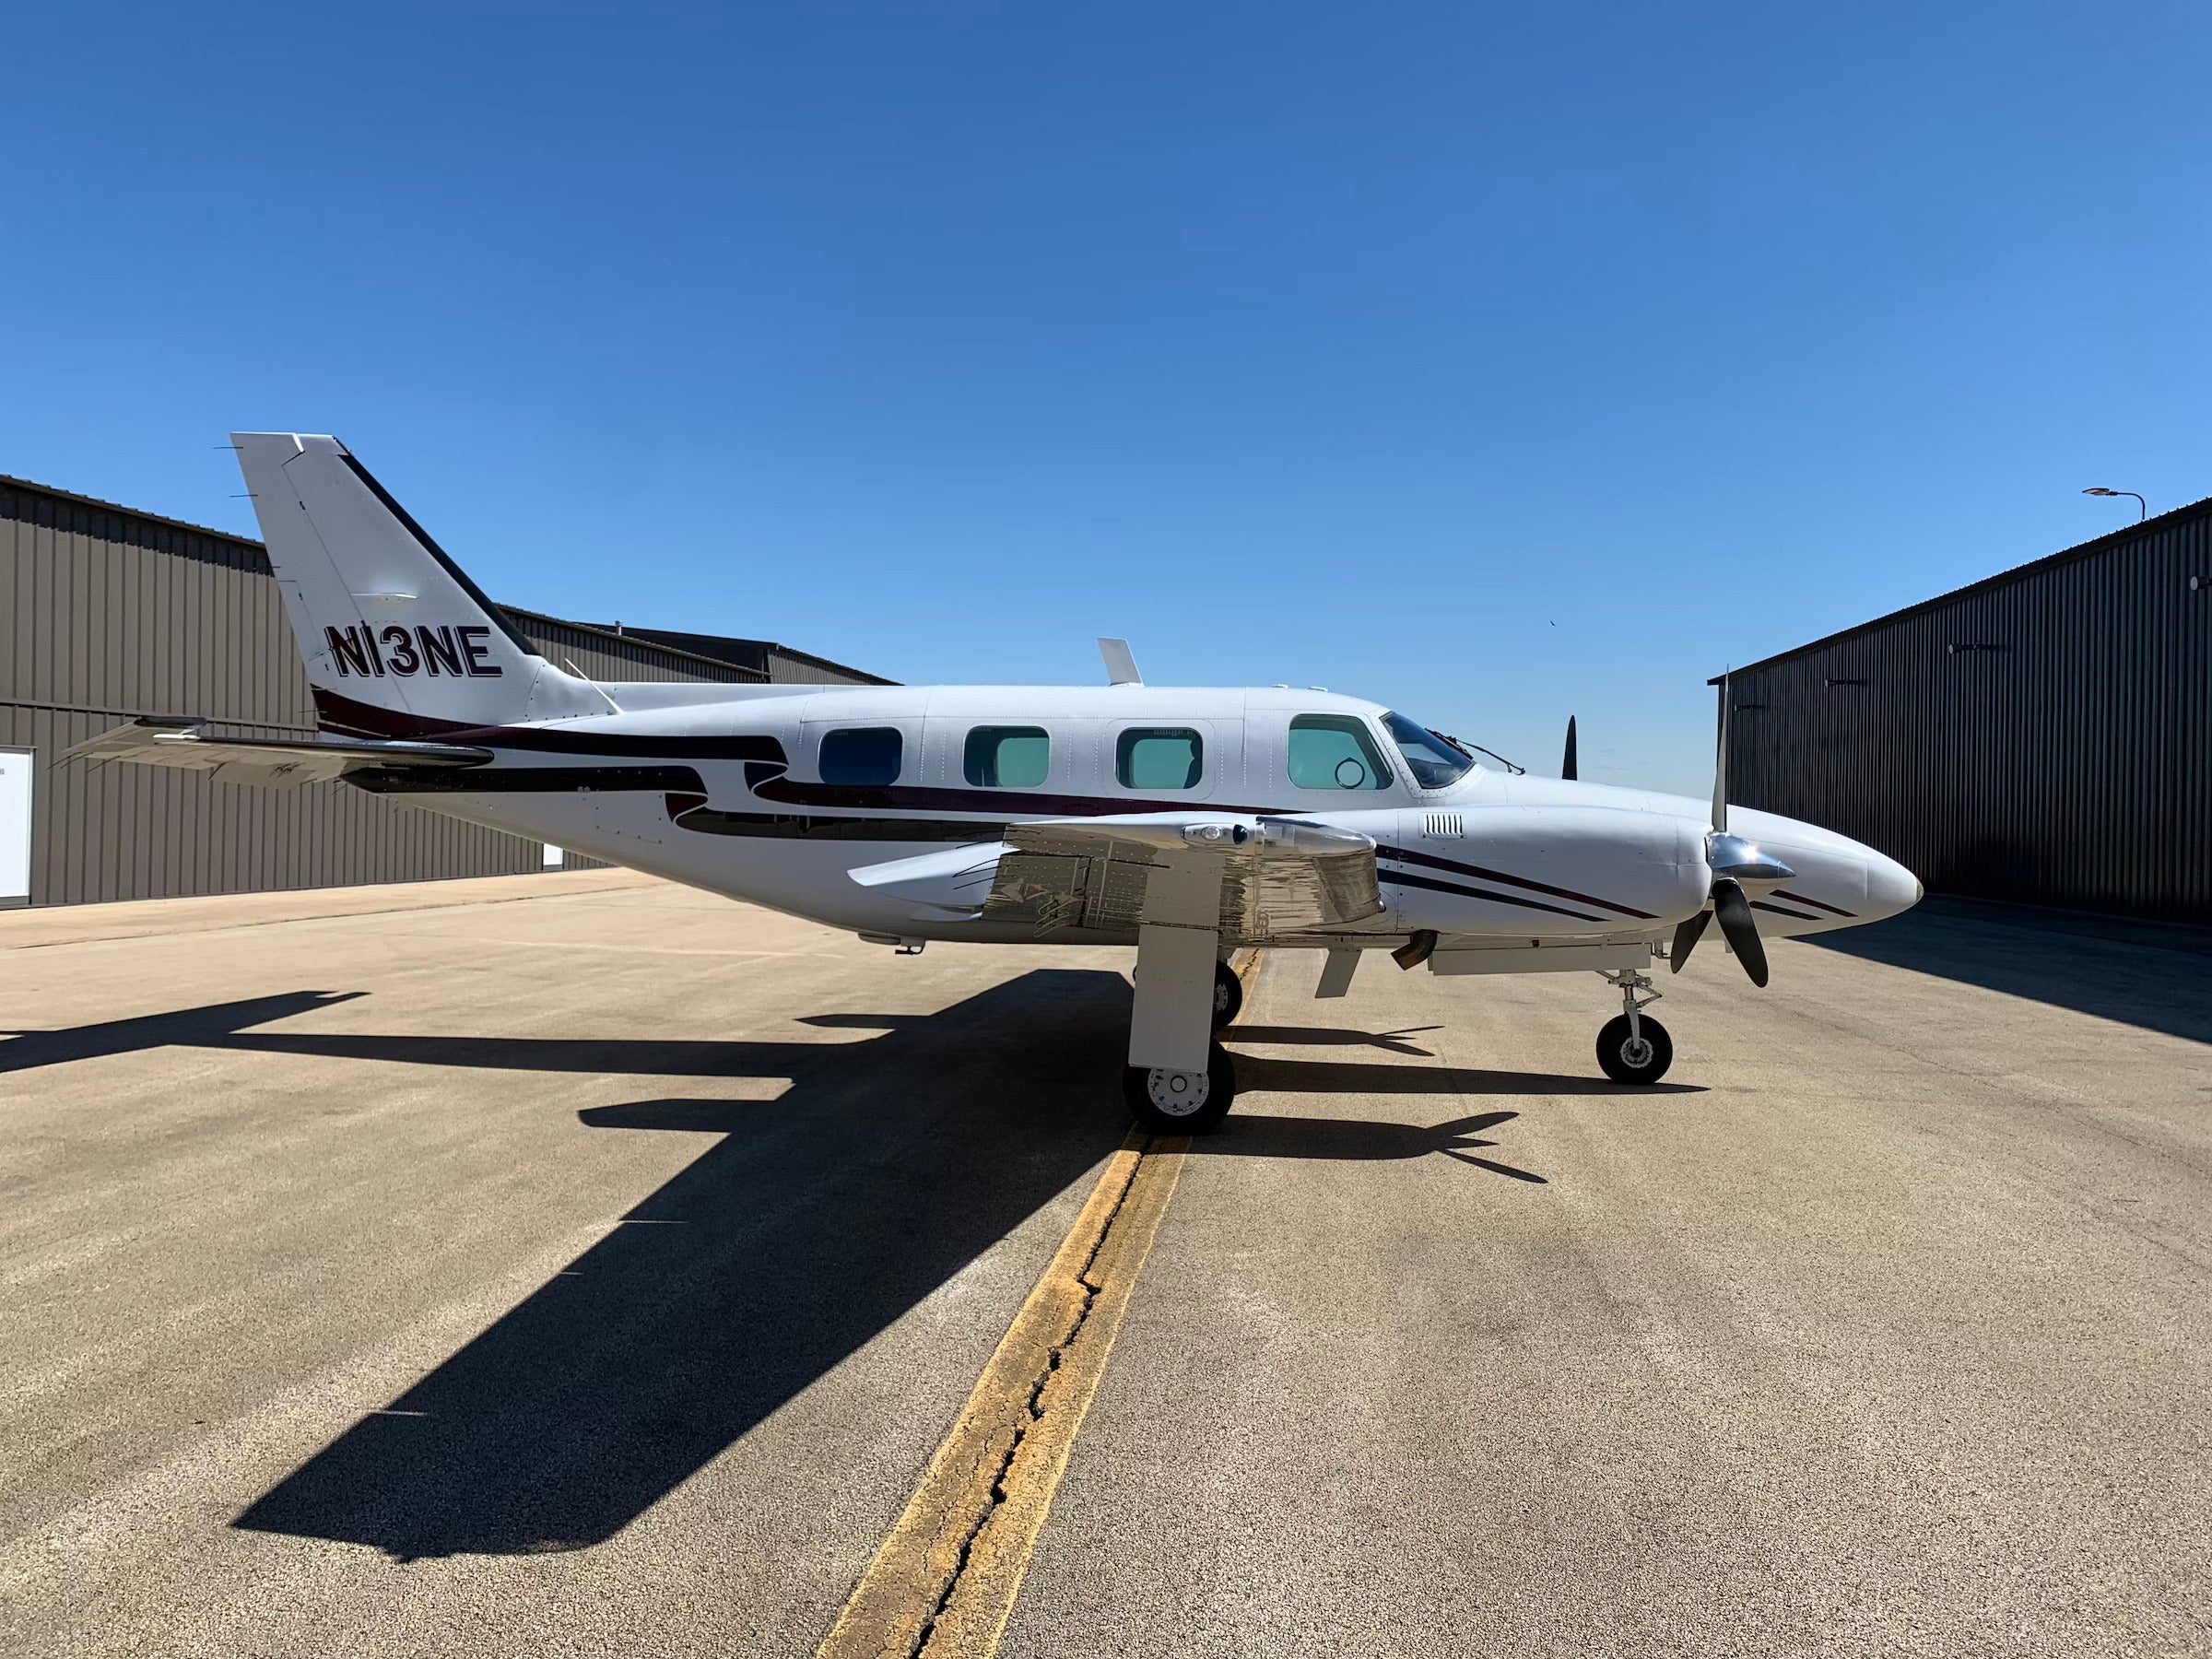 This 1984 Piper PA-31P-350 Mojave Is a Long-Range, High-Flying ‘AircraftForSale’ Top Pick